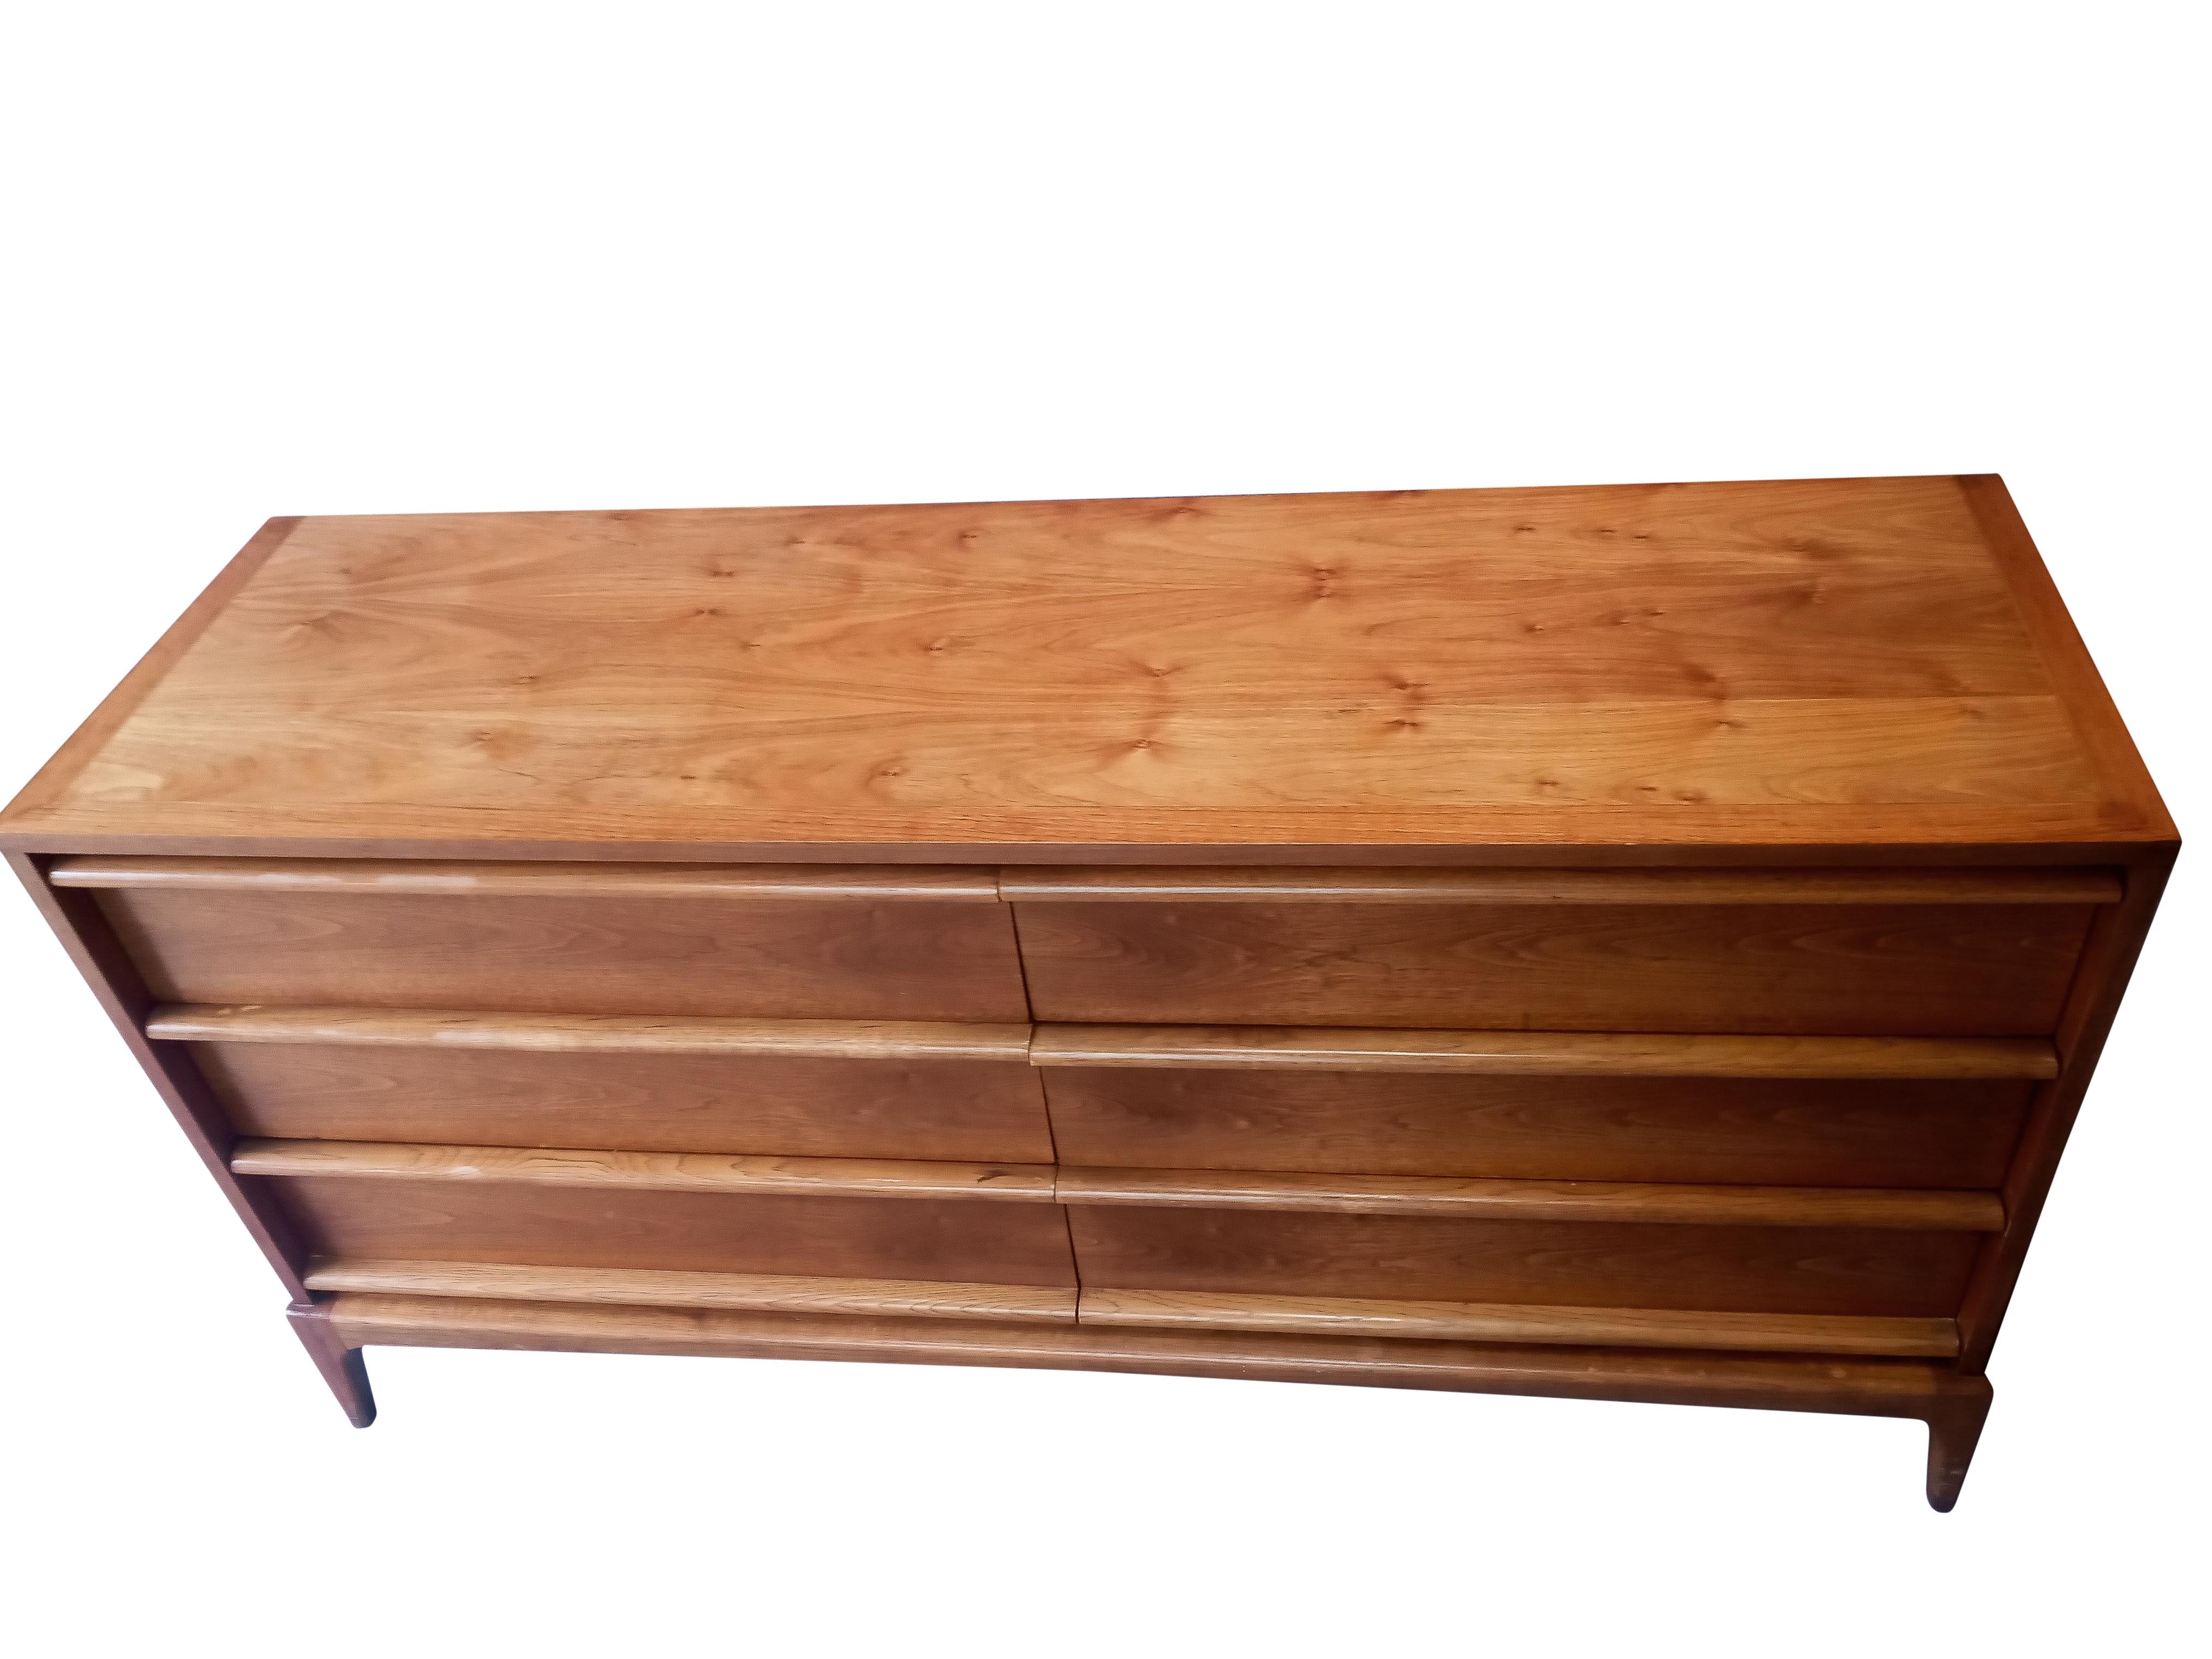 An American Mid-Century walnut double dresser from the 